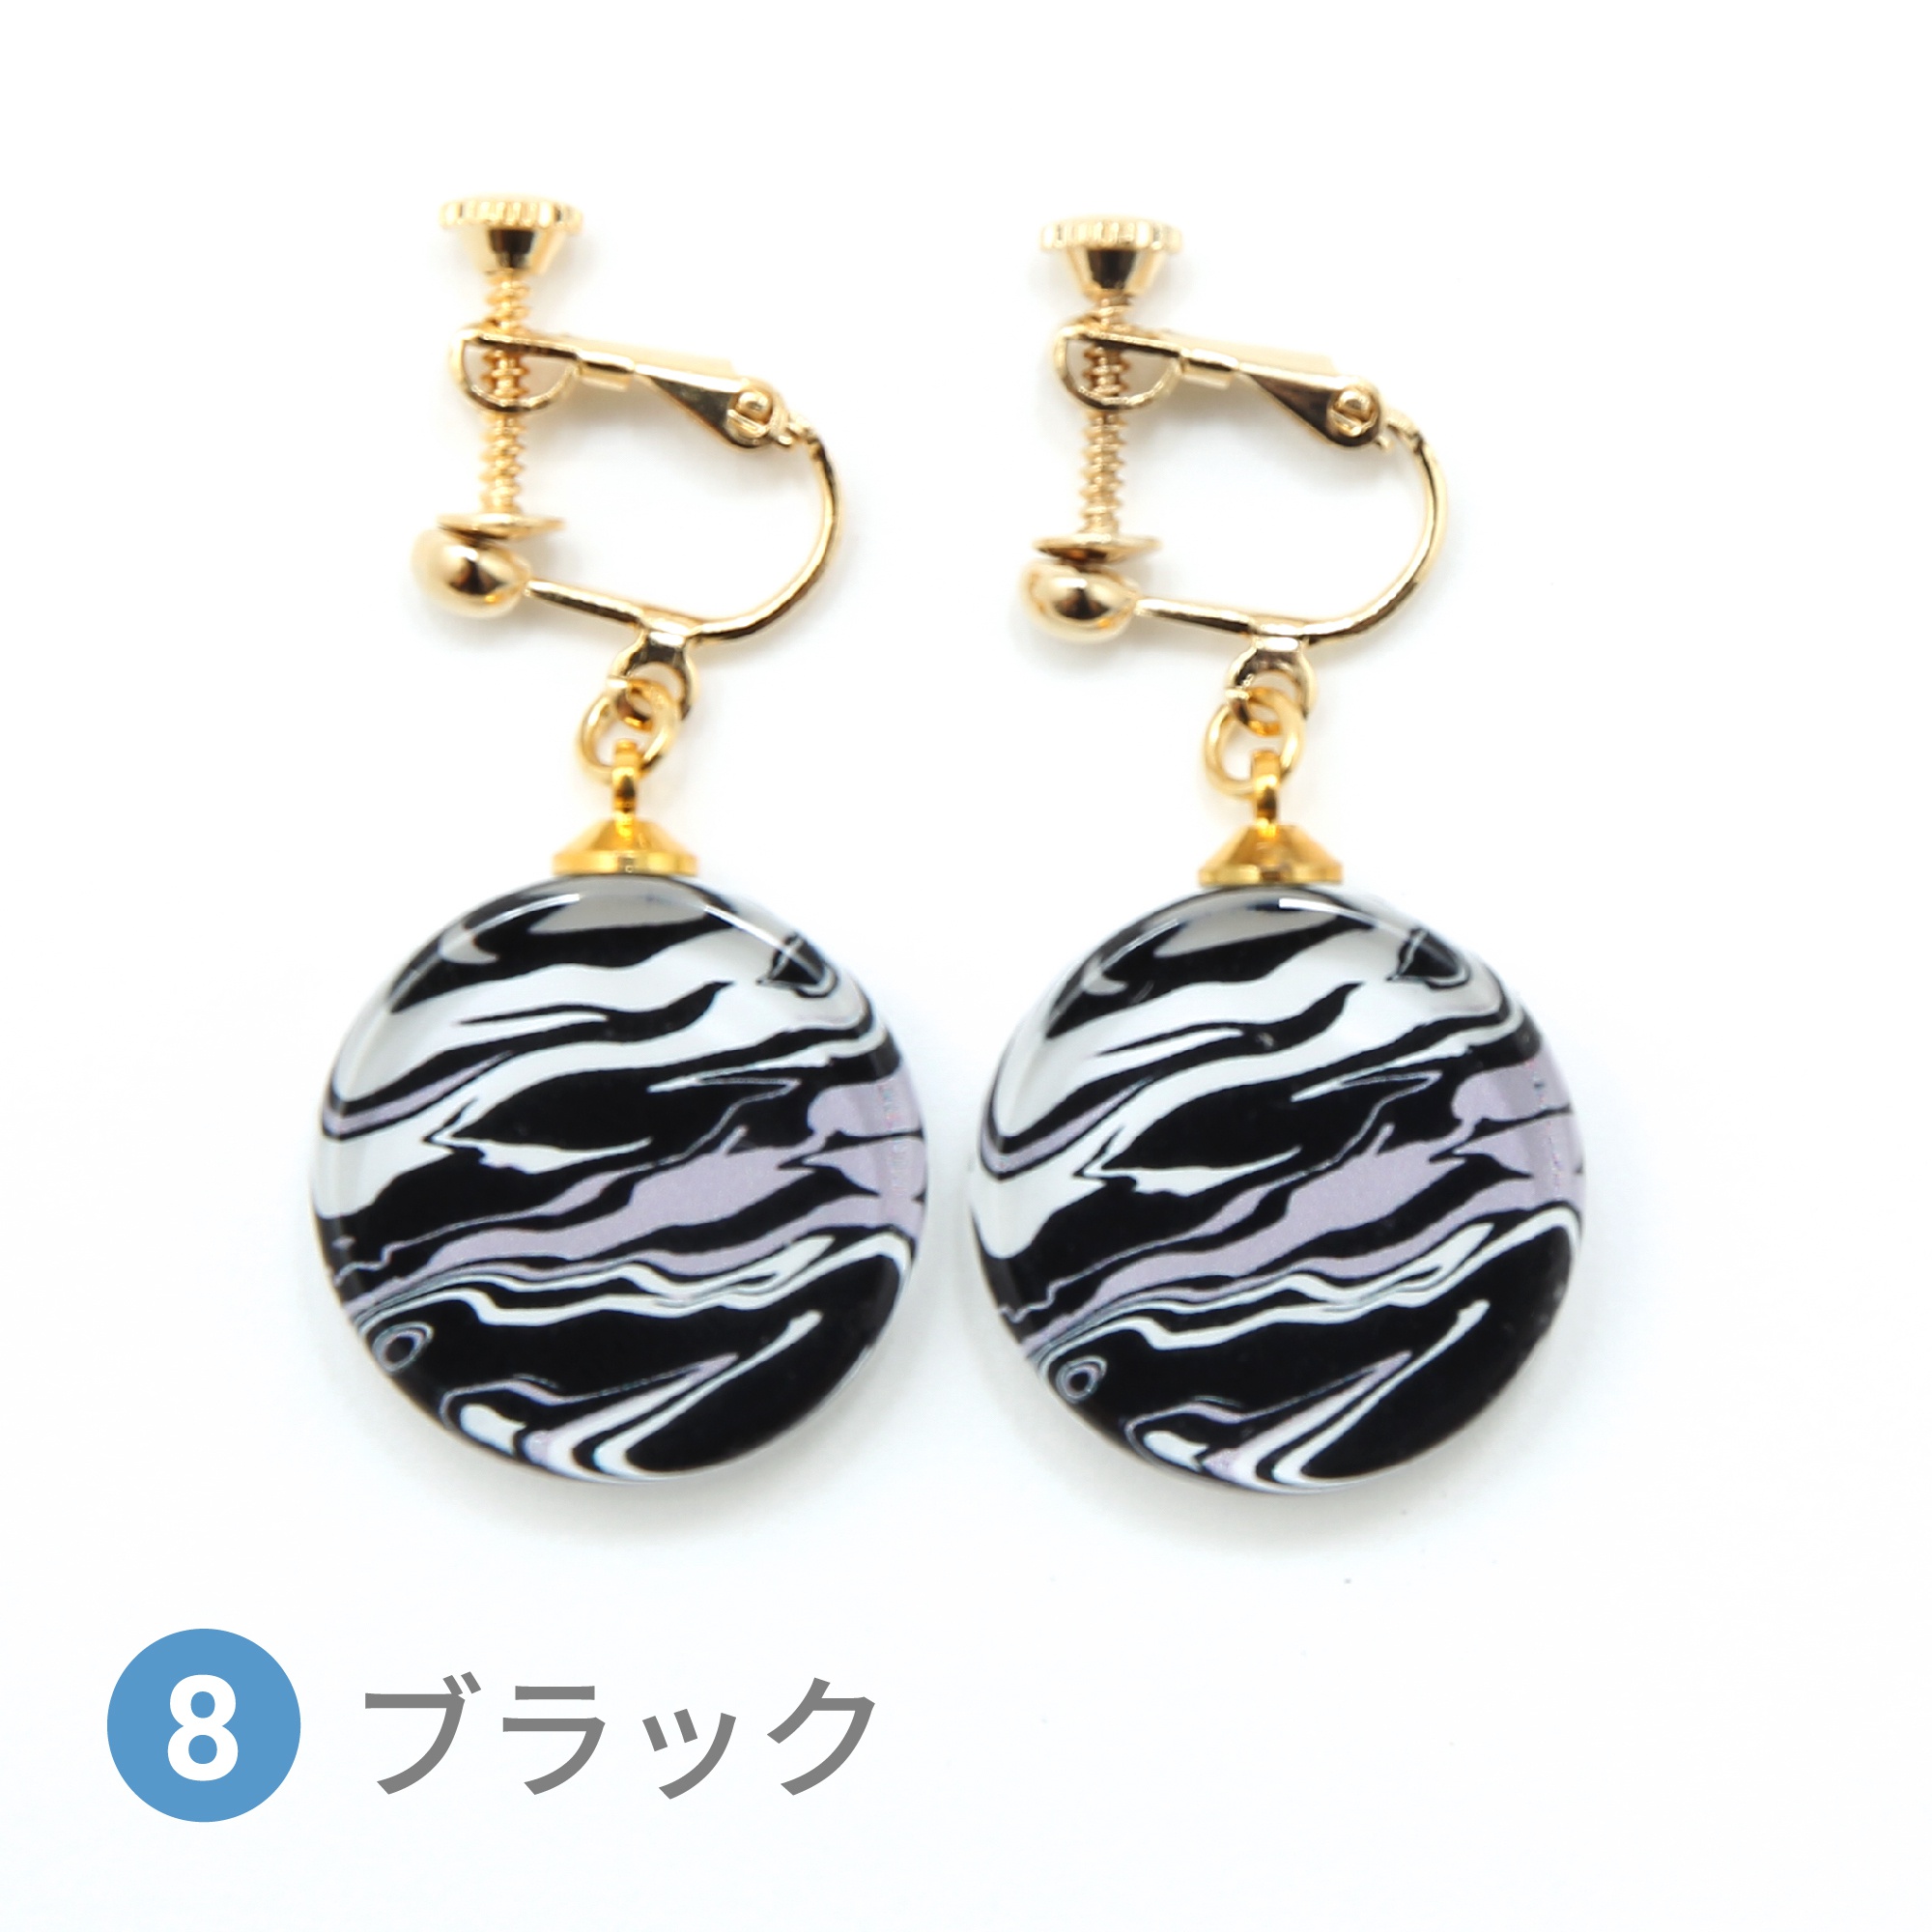 Glass accessories Earring MARBLE black round shape